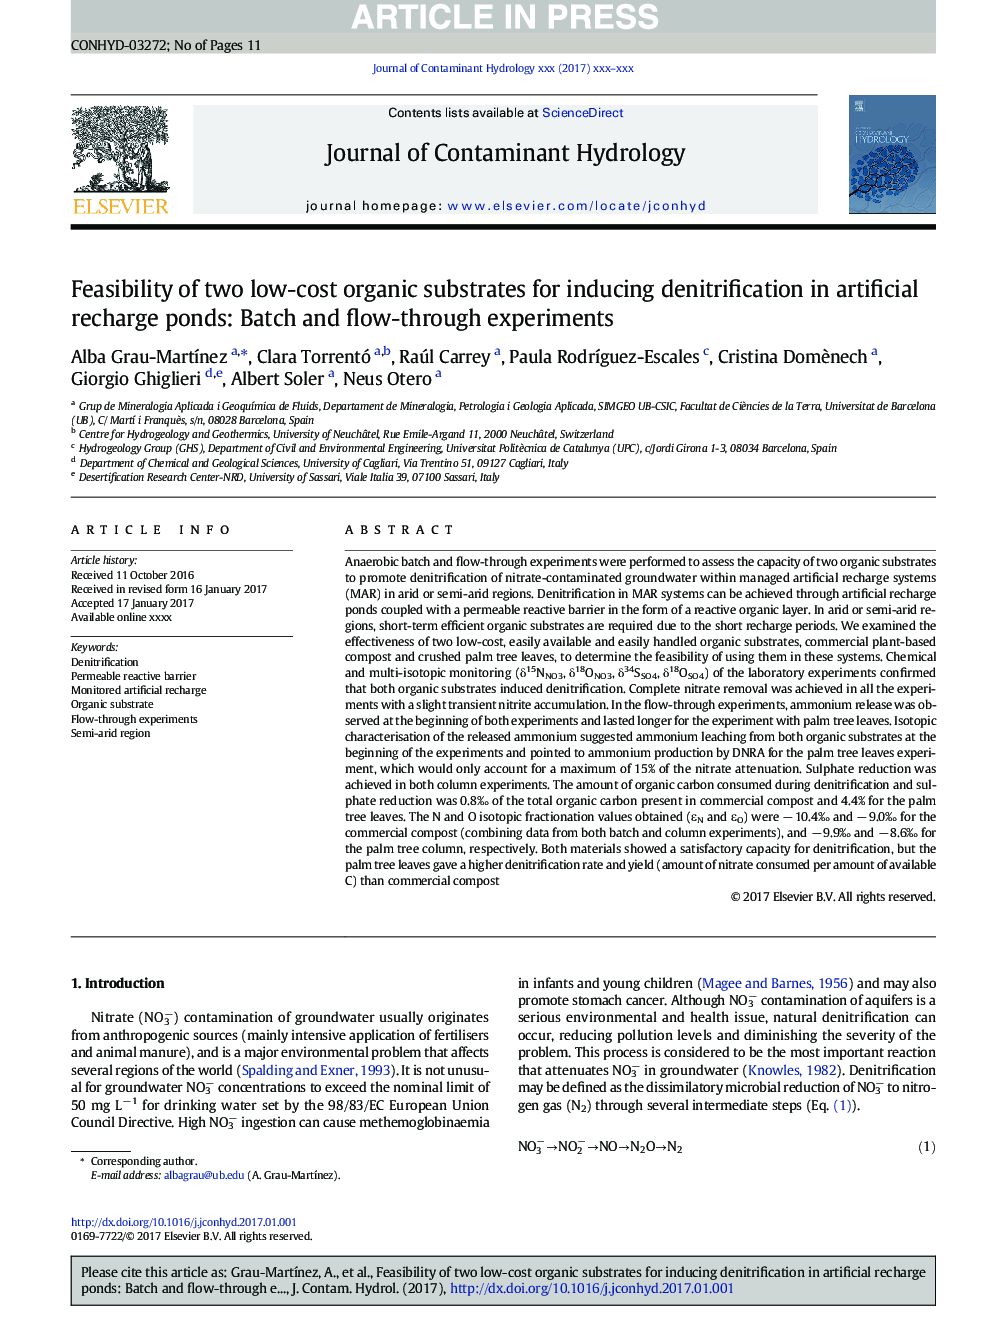 Feasibility of two low-cost organic substrates for inducing denitrification in artificial recharge ponds: Batch and flow-through experiments